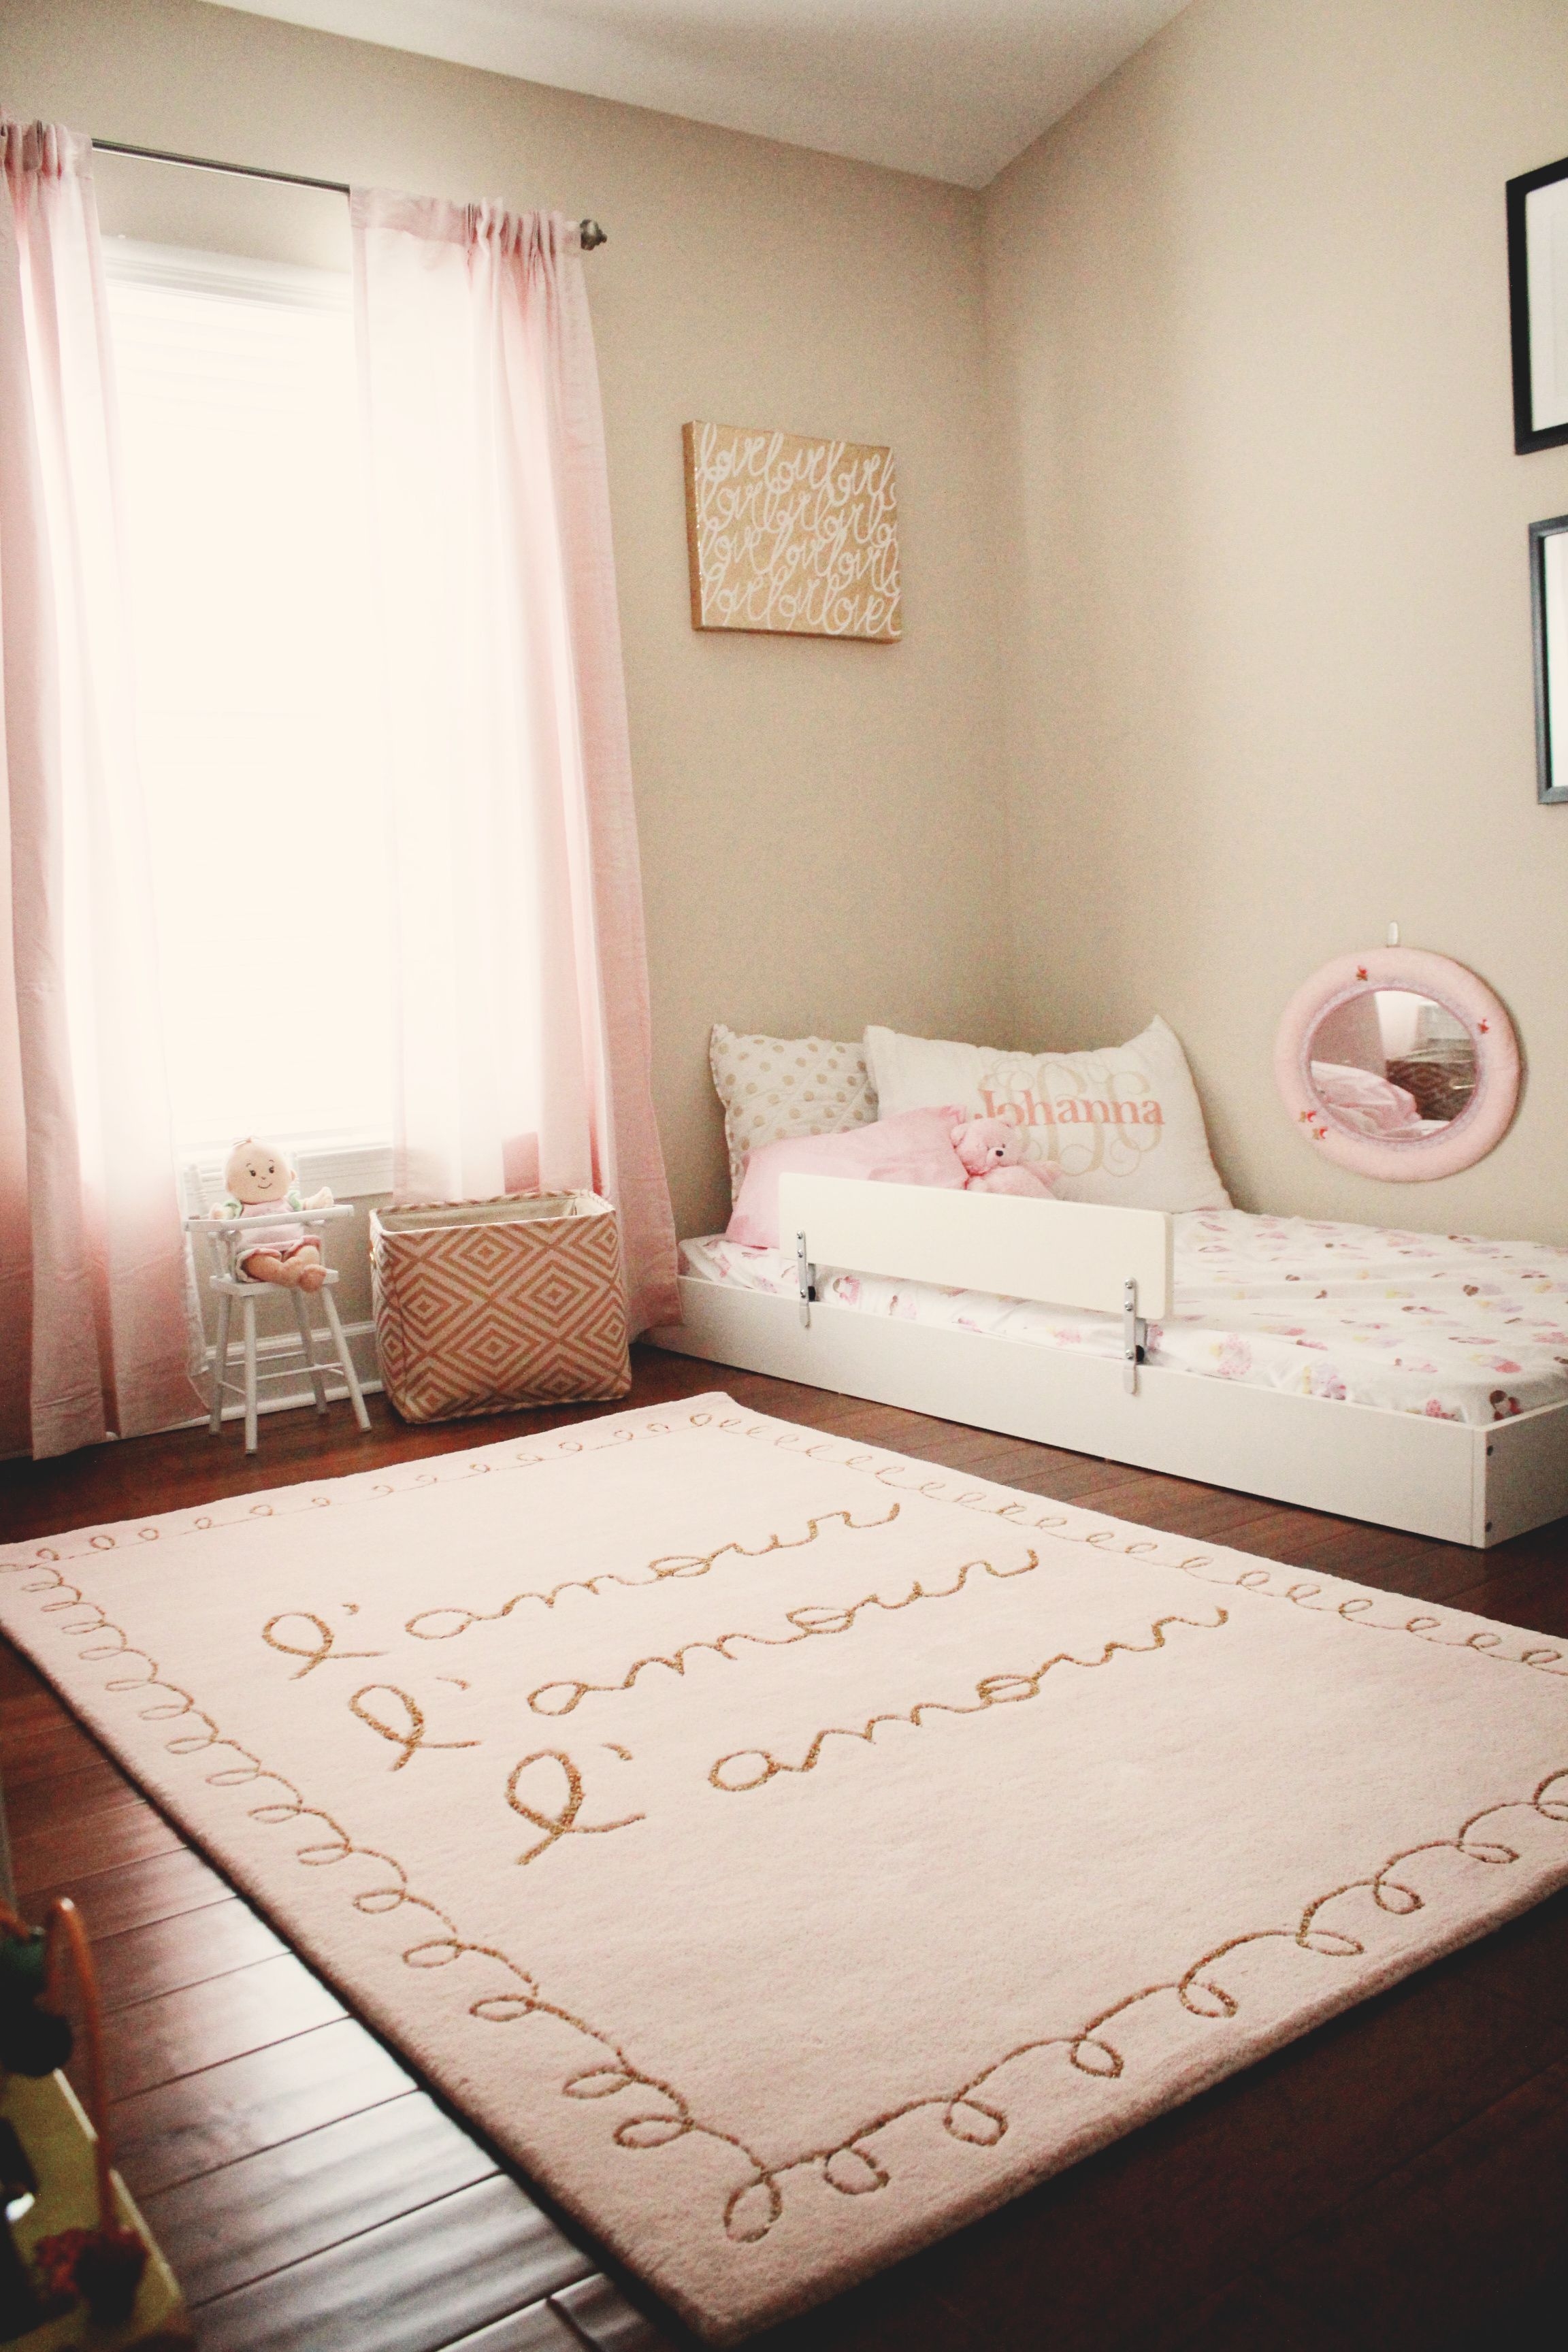 toddlers bed for girls